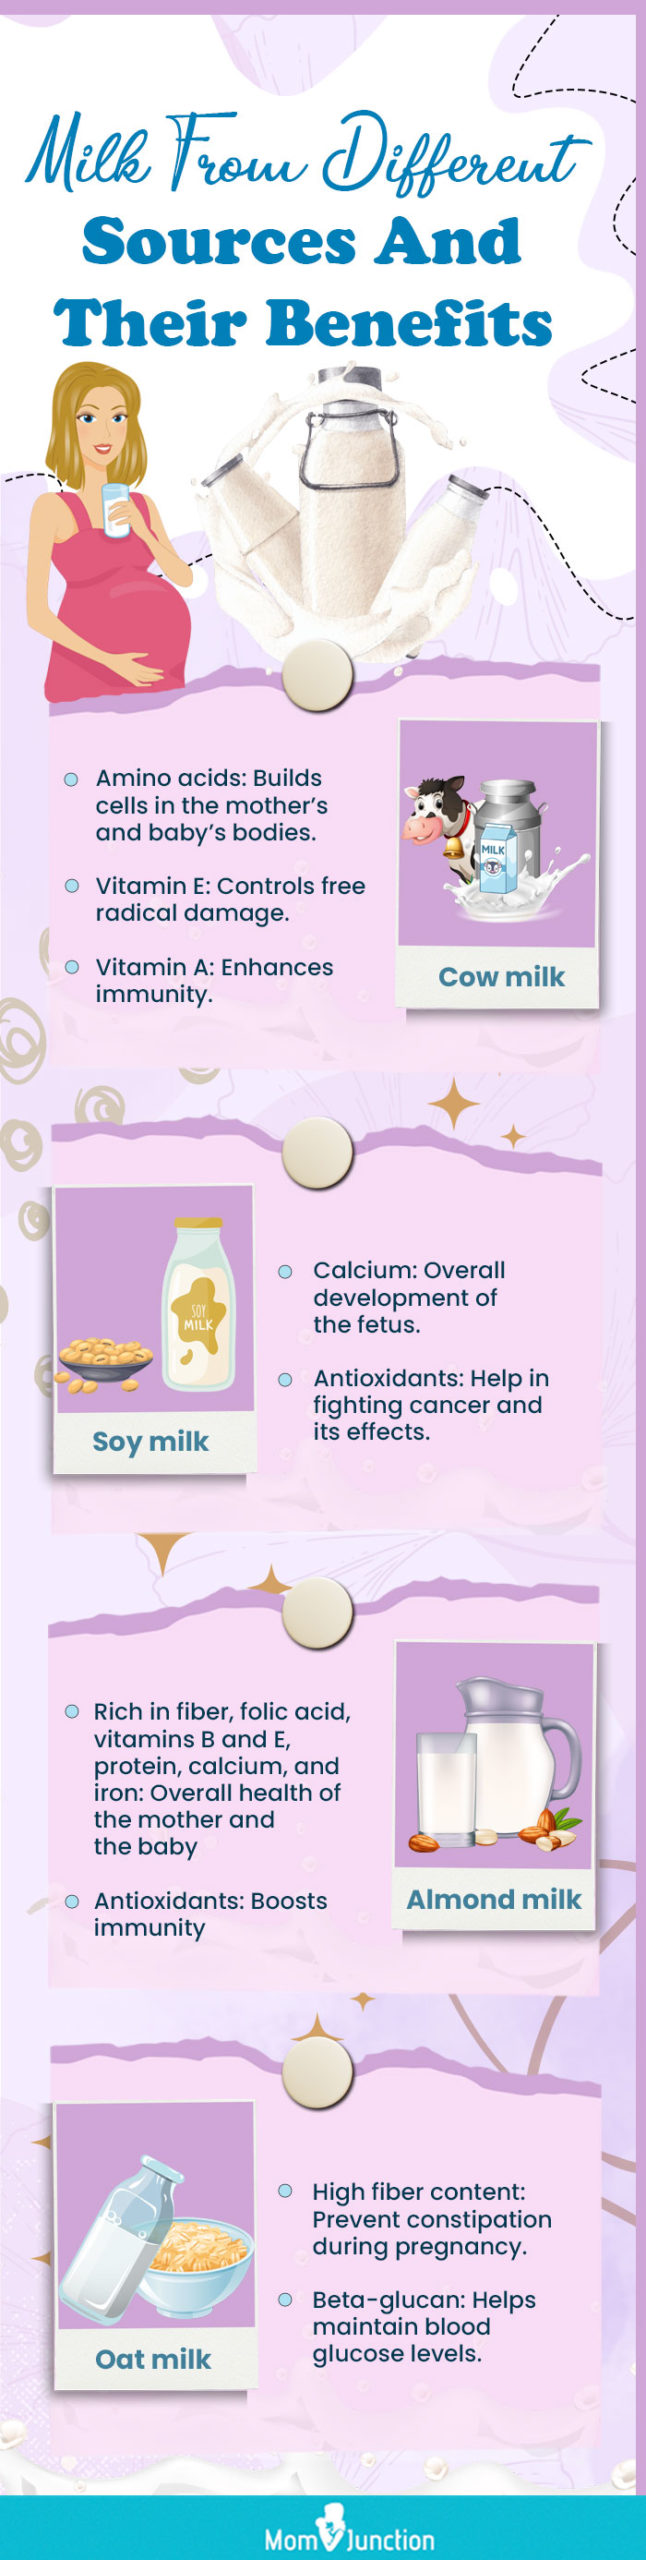 Is It Safe to Drink Cow Milk During Pregnancy